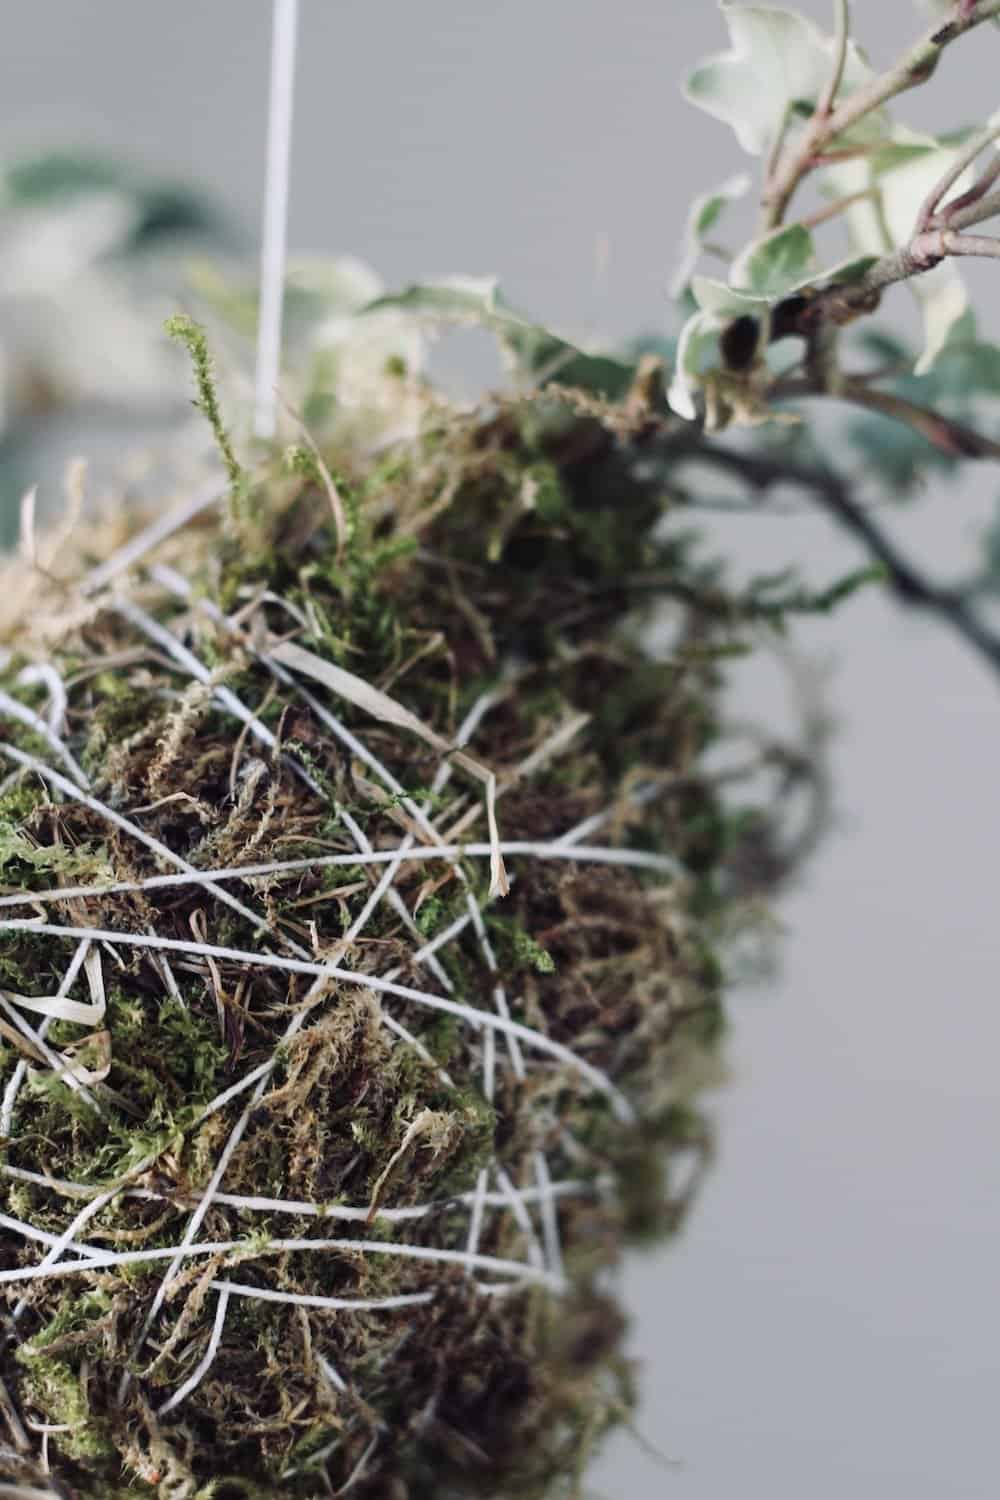 You might want to find some moss to make this gorgeous hanging plant! This kokedama moss ball is an easy way to bring greenery into your home year-round. #kokedama #mossball #kokedamamossball #stringgarden #moss